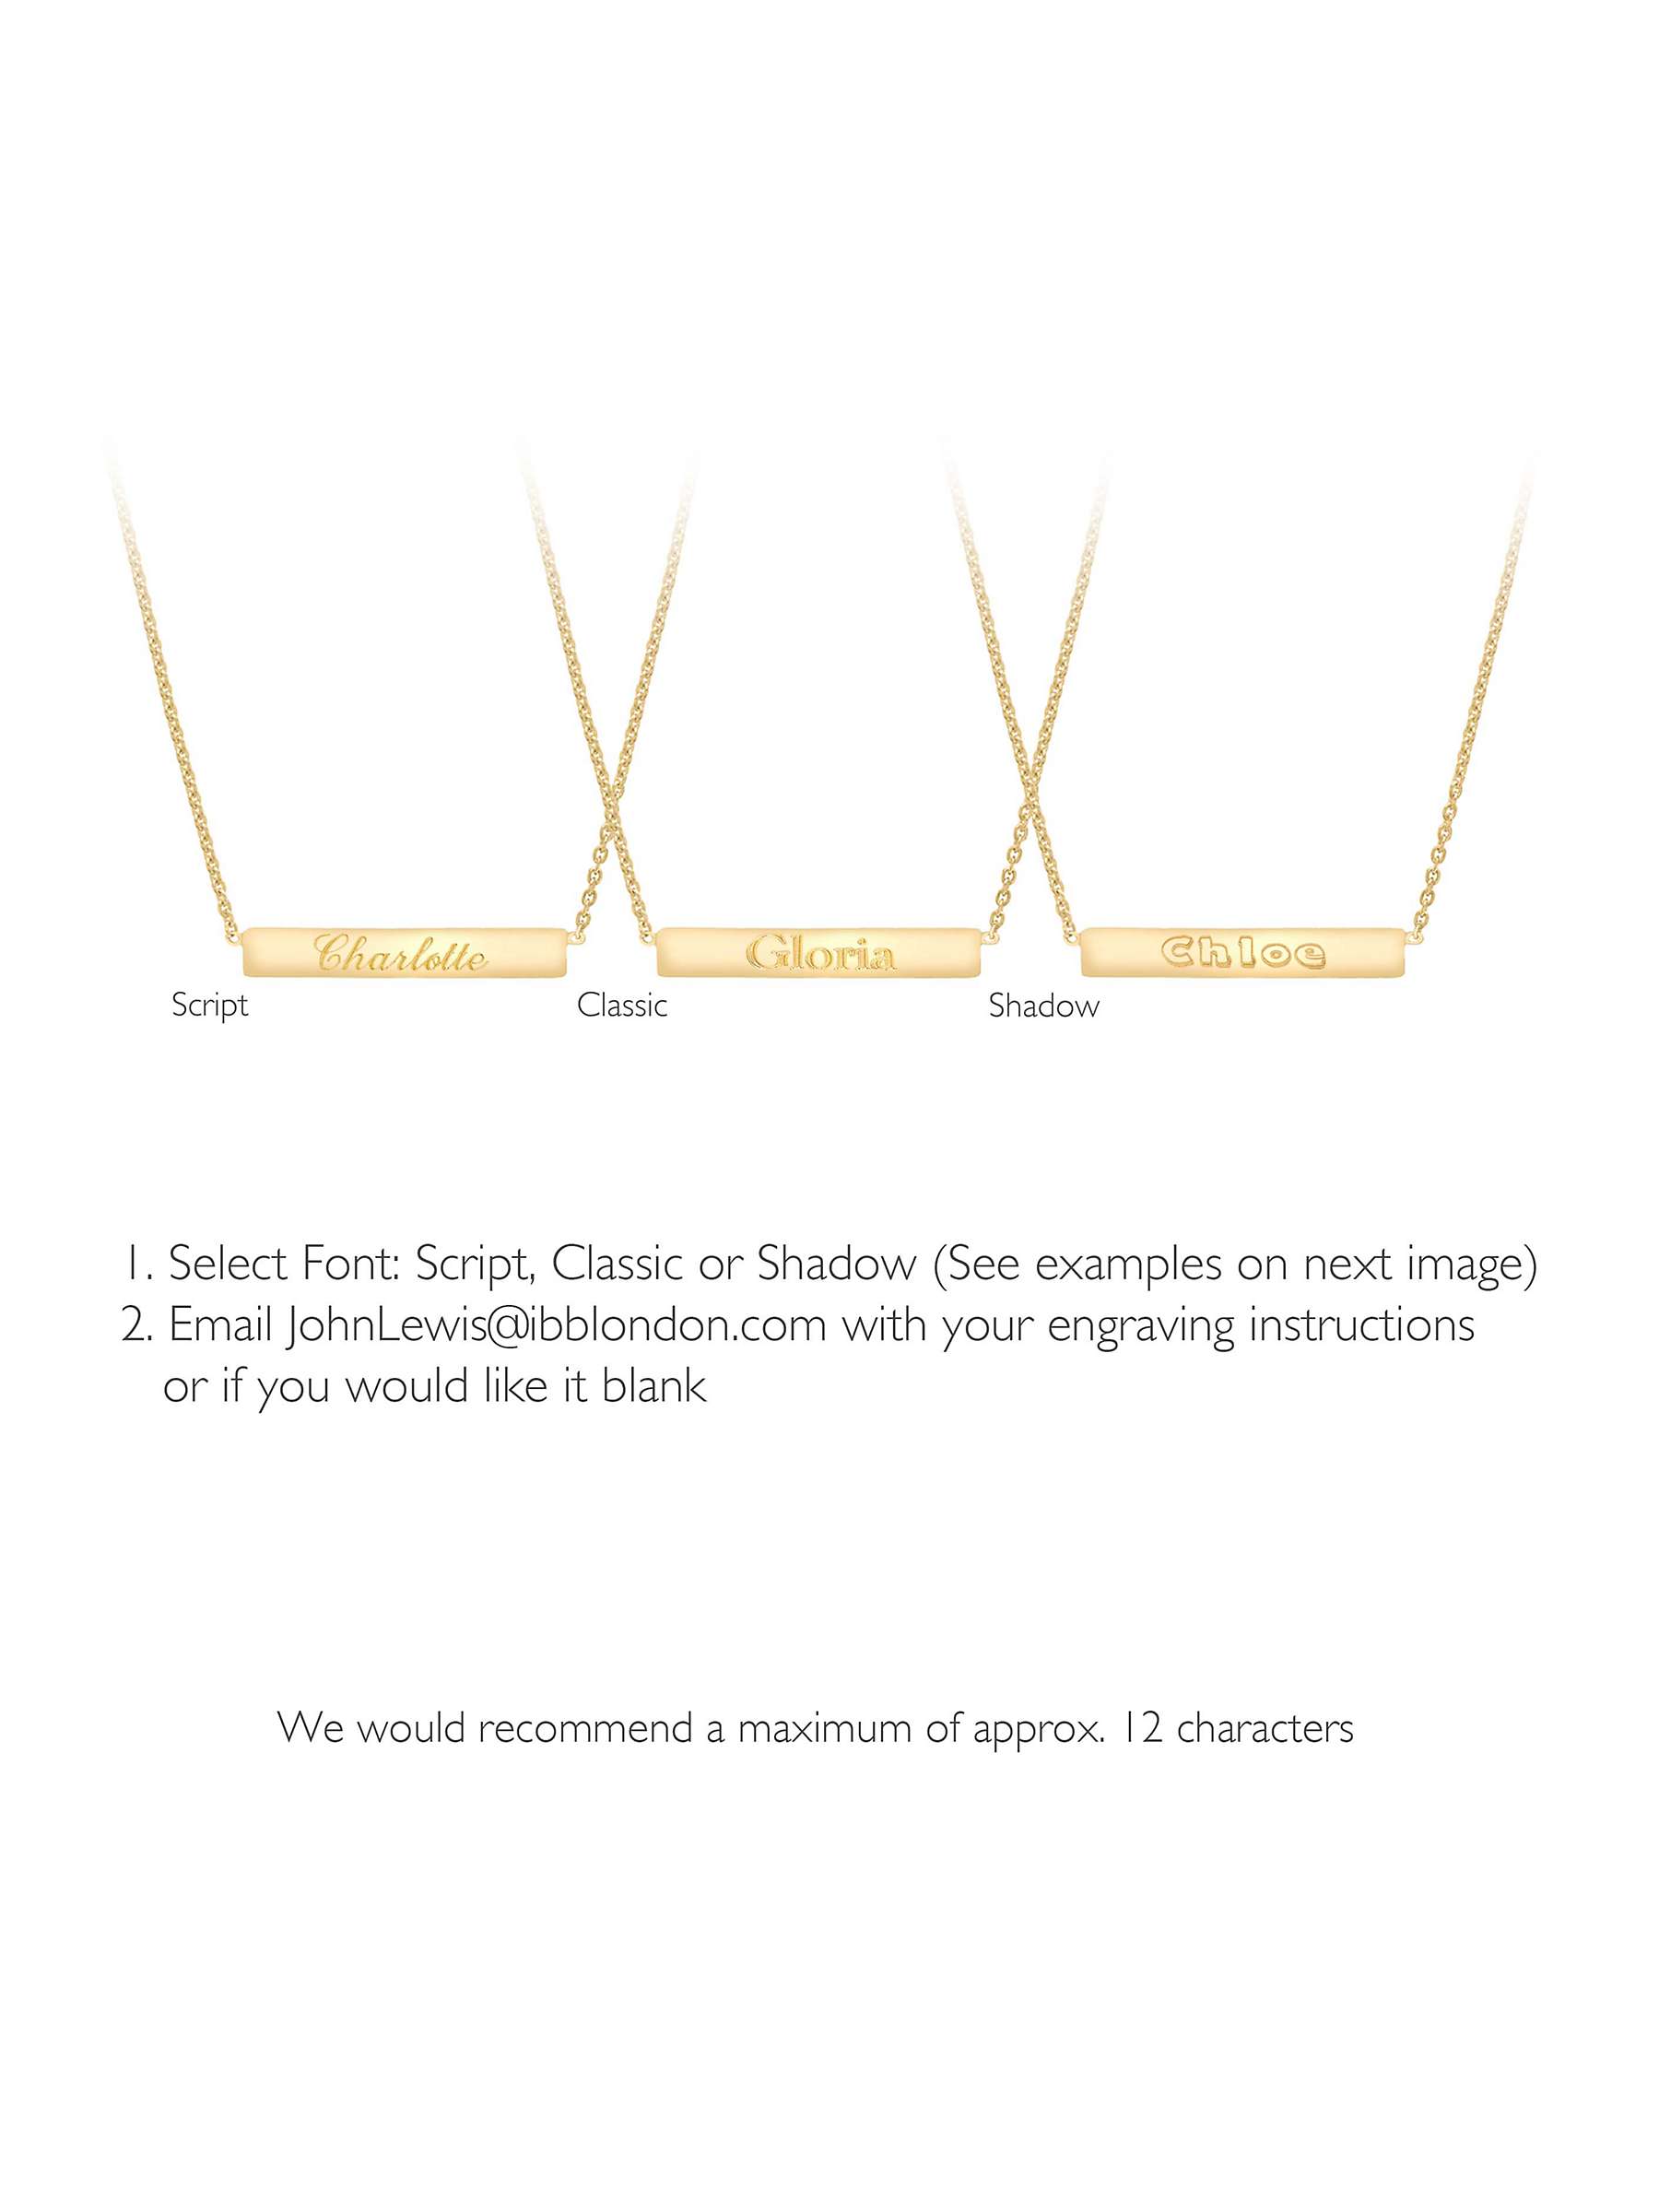 Buy IBB Personalised Small Horizontal Bar Initial Pendant Necklace, Gold Online at johnlewis.com